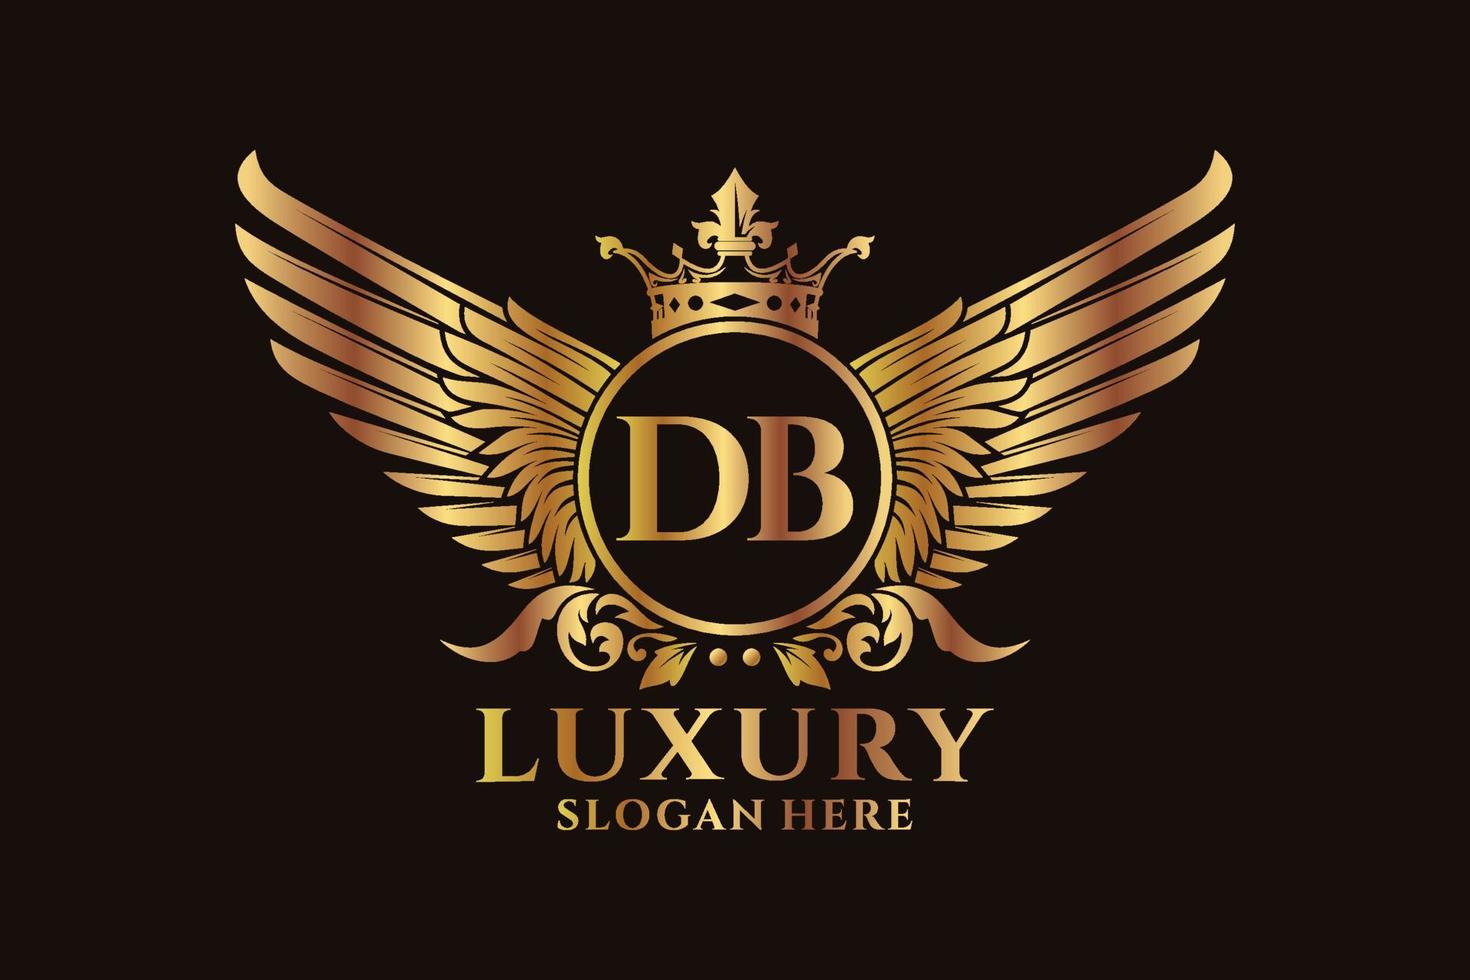 Luxury royal wing Letter DB crest Gold color Logo vector, Victory logo, crest logo, wing logo, vector logo template.